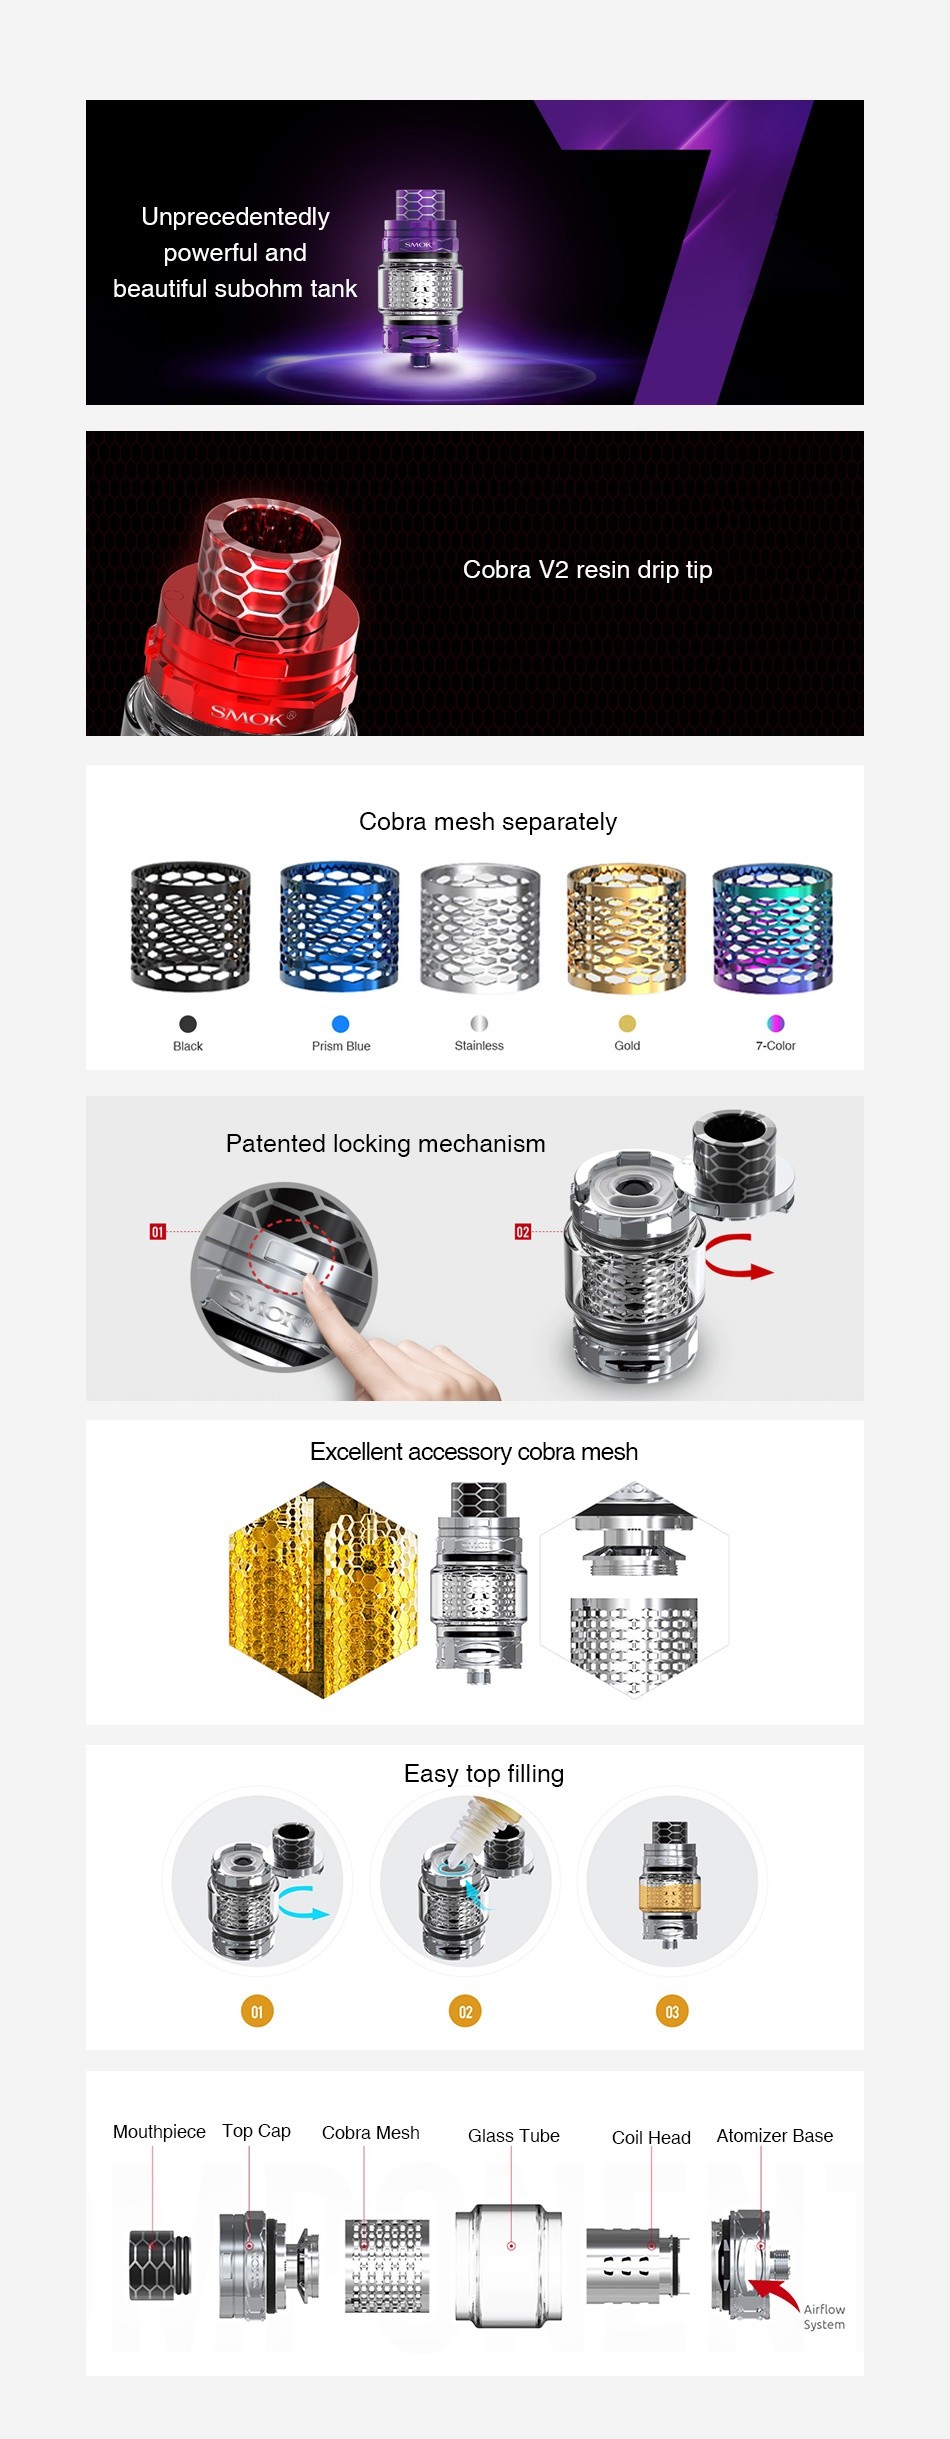 SMOK TFV12 Prince Cobra Edition Tank 7ml/2ml Unp powerful and beautiful subohm tank Cobra v2 resin drip tip Cobra mesh separately Prism Elue Stainless 7 Color Patented locking mechanism 2 Excellent accessory cobra mesh Easy top filling Mouthpiece Top Cap Cobra Mcsh Glass Tube Cail Head Atomizer Base